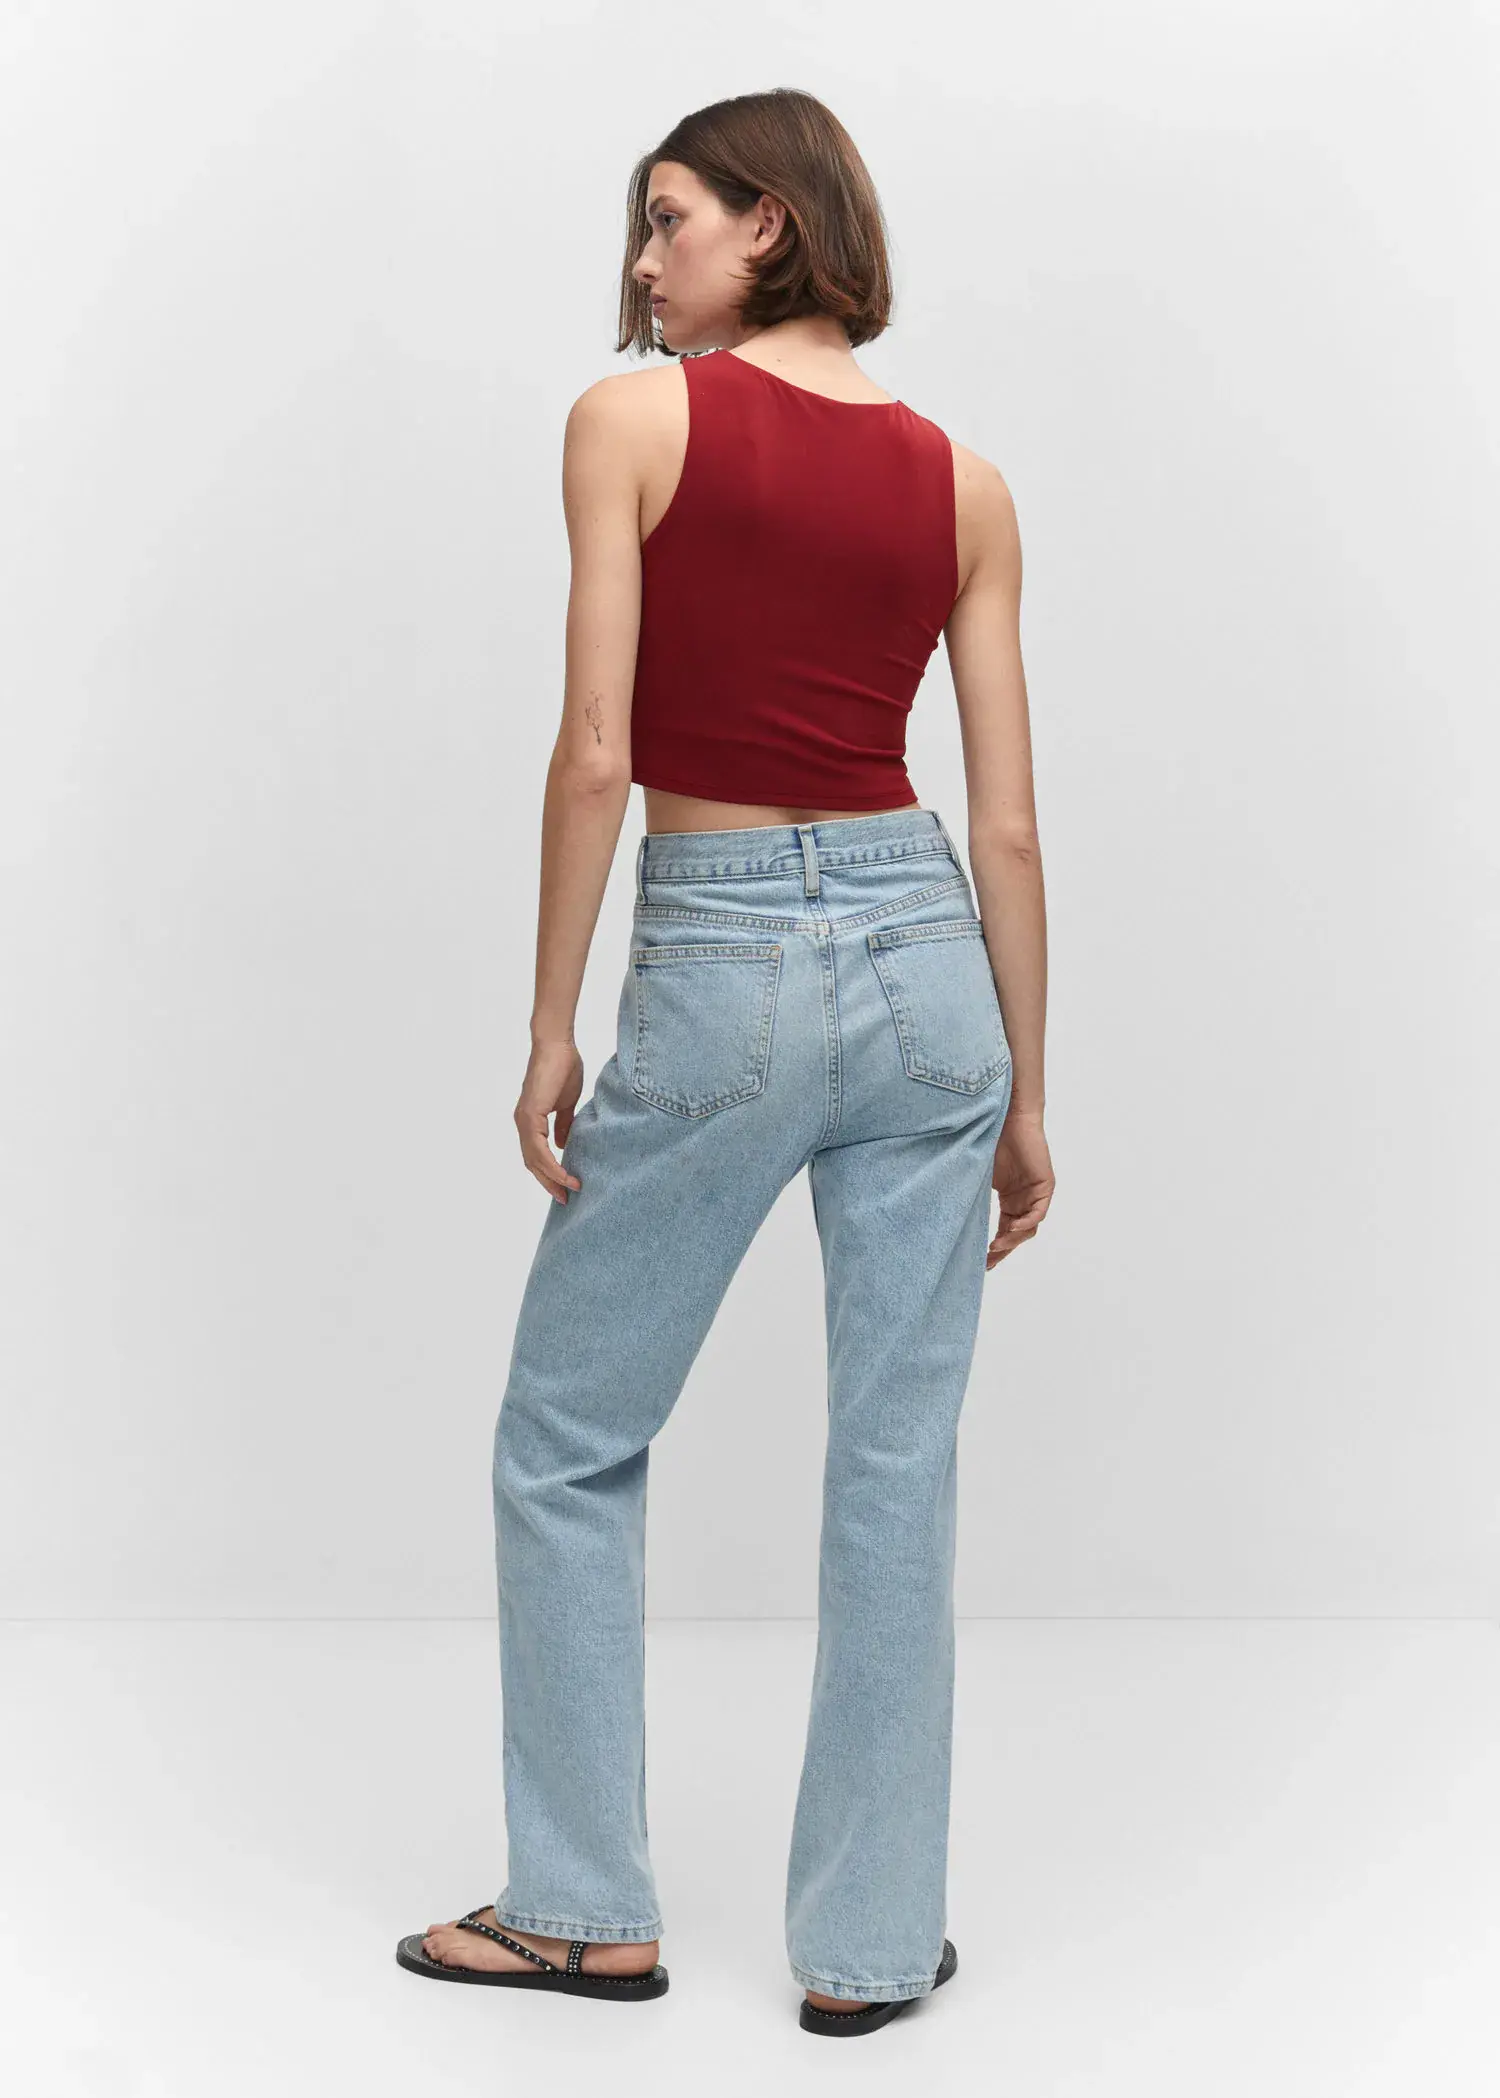 Mango Crop top with halter neck. a woman in a red top and light blue jeans. 